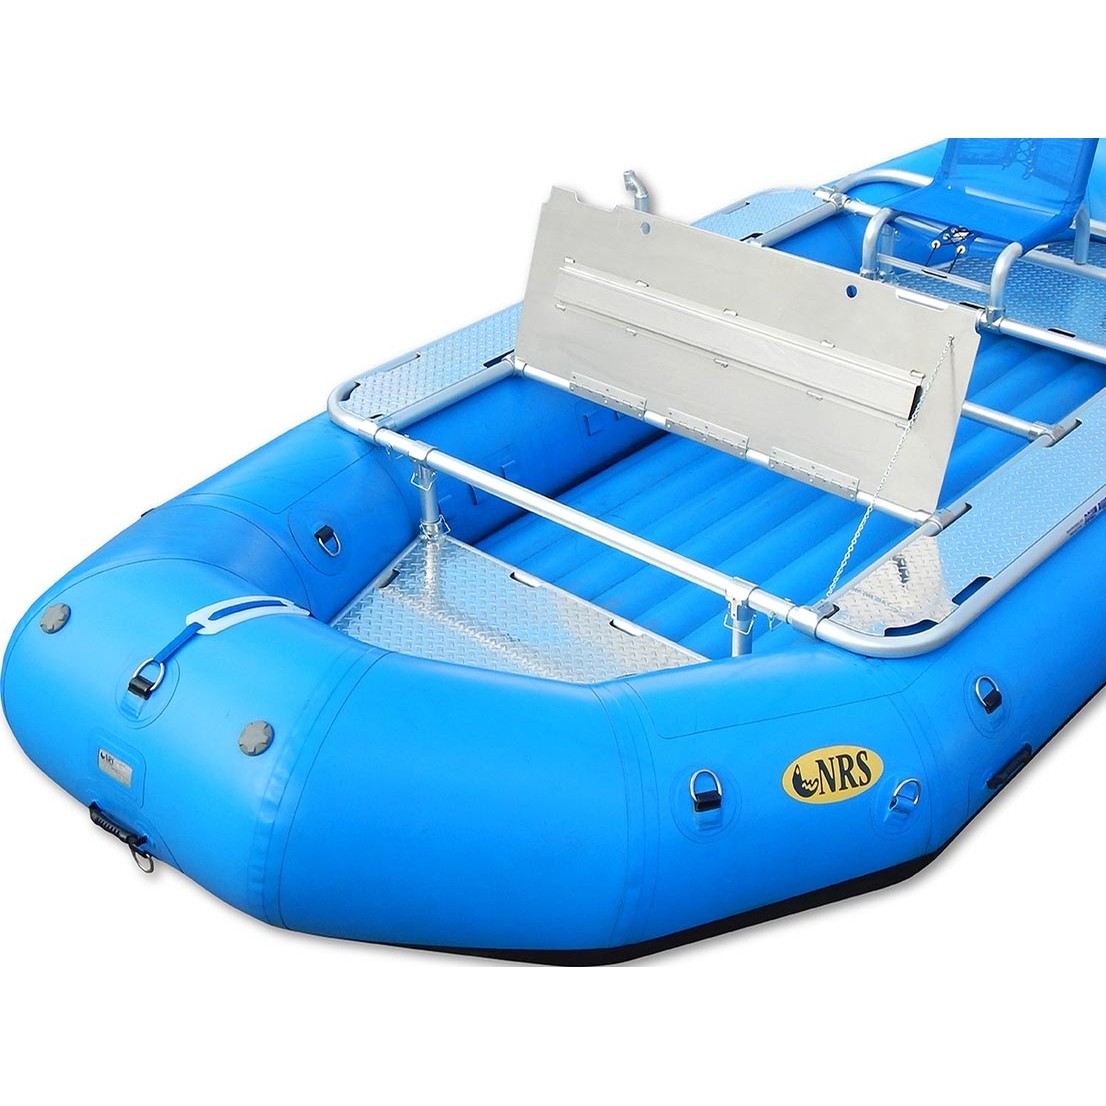 Rocky Mountain Raft 10.5' Raft/DRE Taylor LD 2-Bay Fishing Frame Packa -  Southwest Raft and Jeep